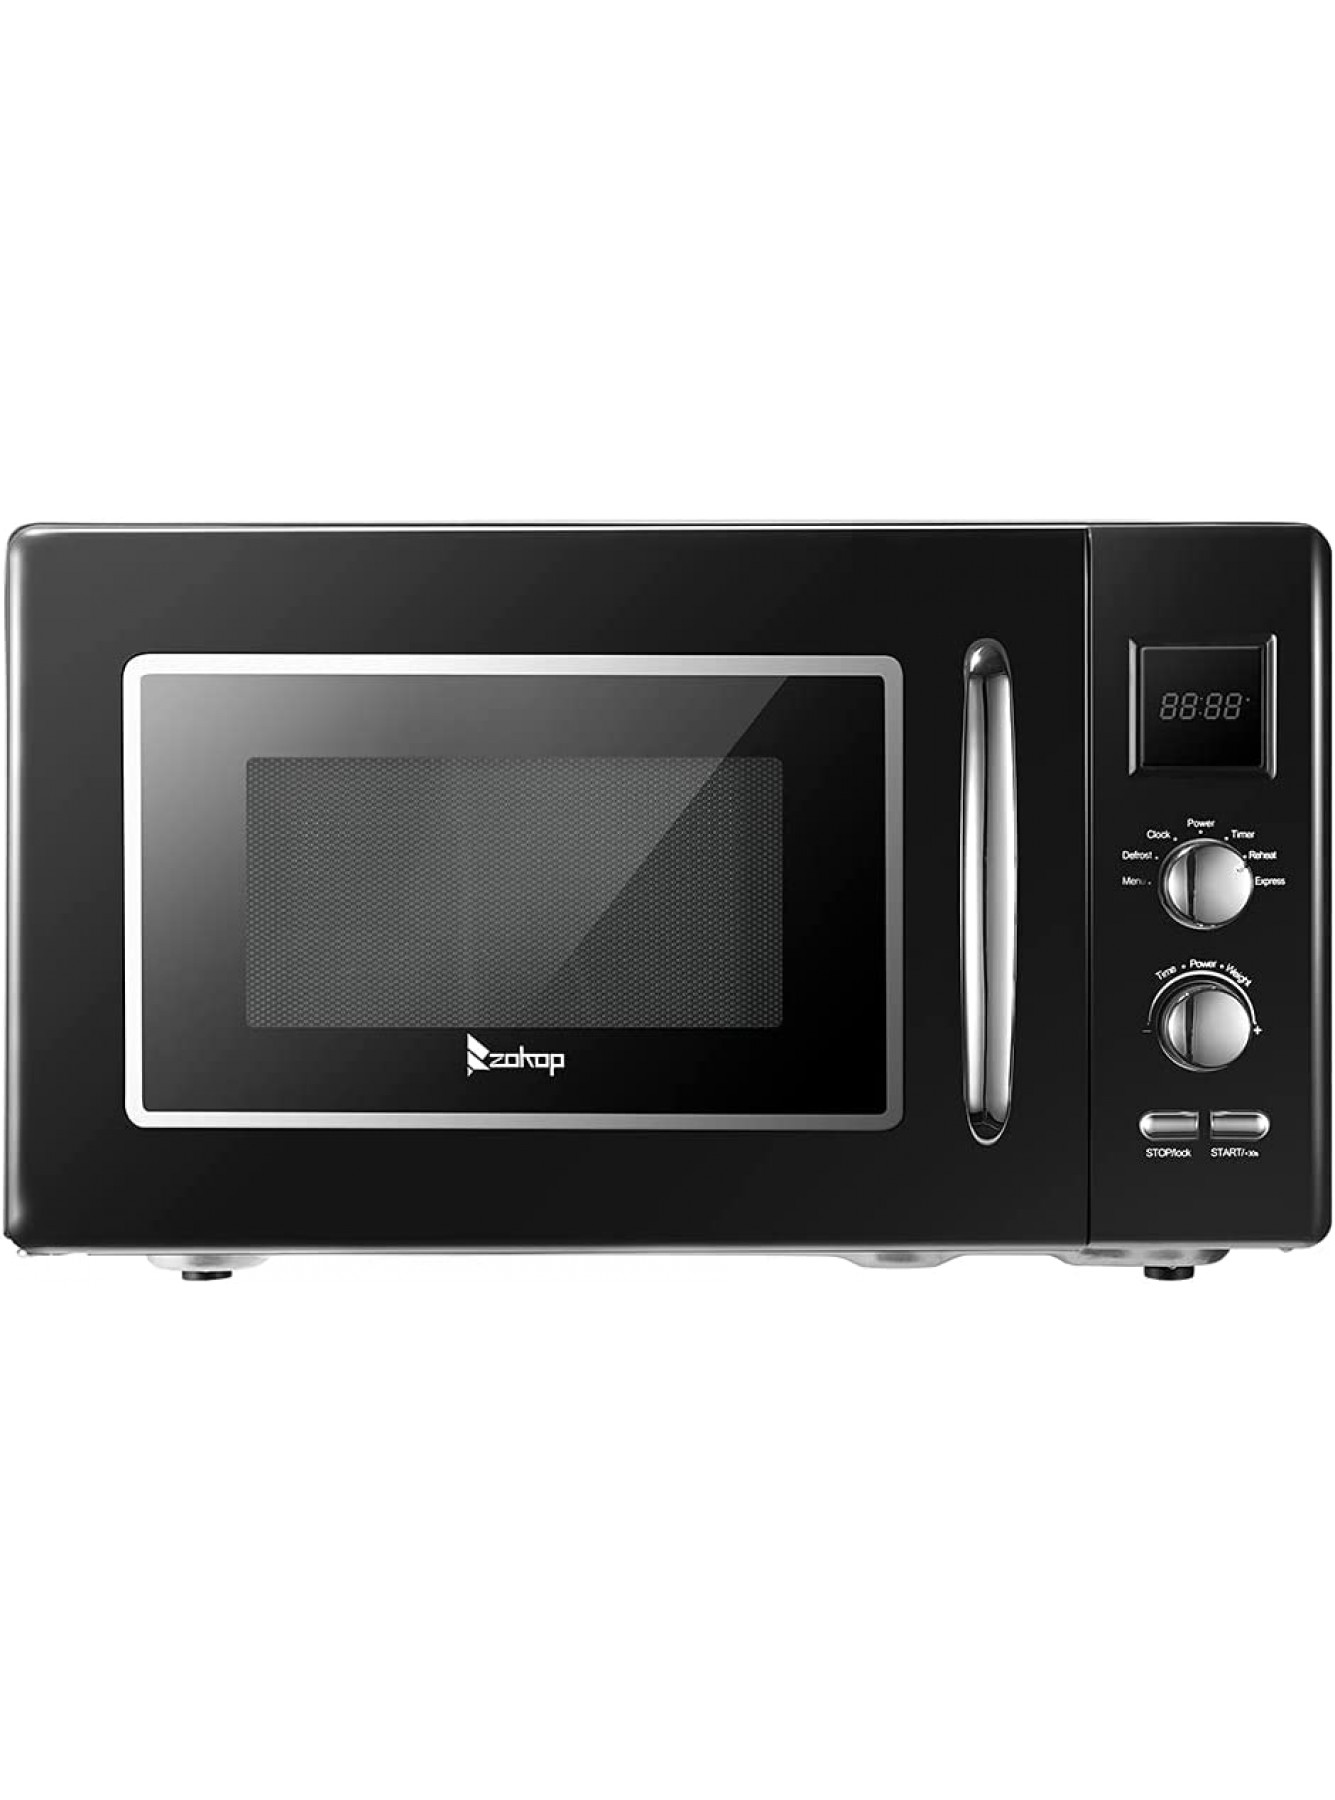 23L 0.9cuft Retro Countertop Microwave Oven,Easy Clean with Glass Turntable Display Silver Pull Handle,Black B09WYJGX48